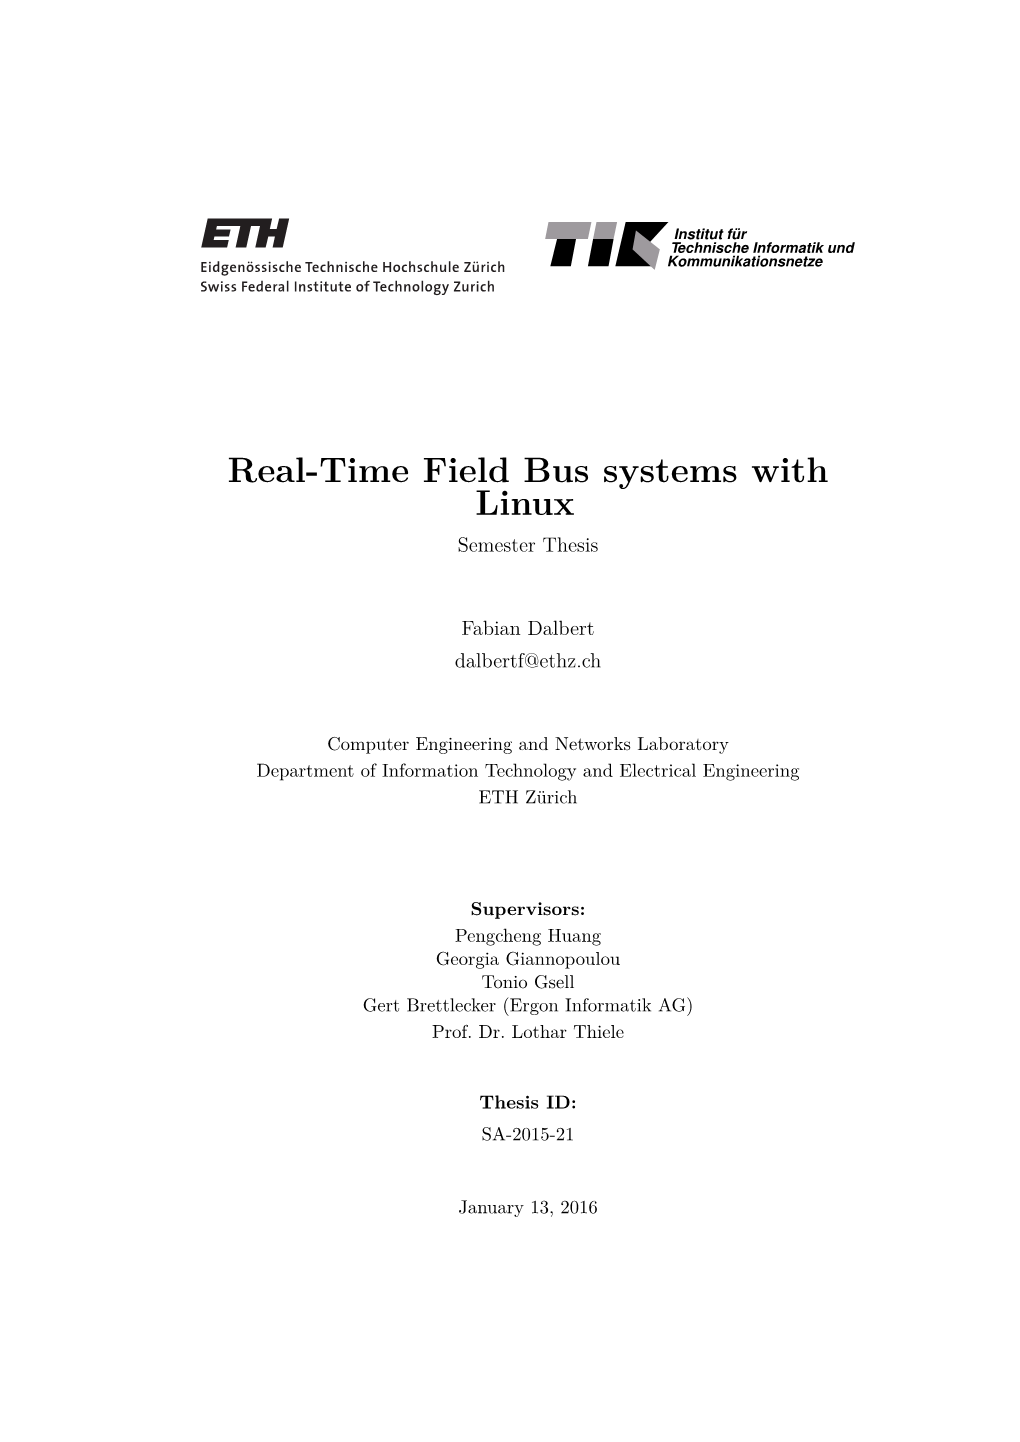 Real-Time Field Bus Systems with Linux Semester Thesis